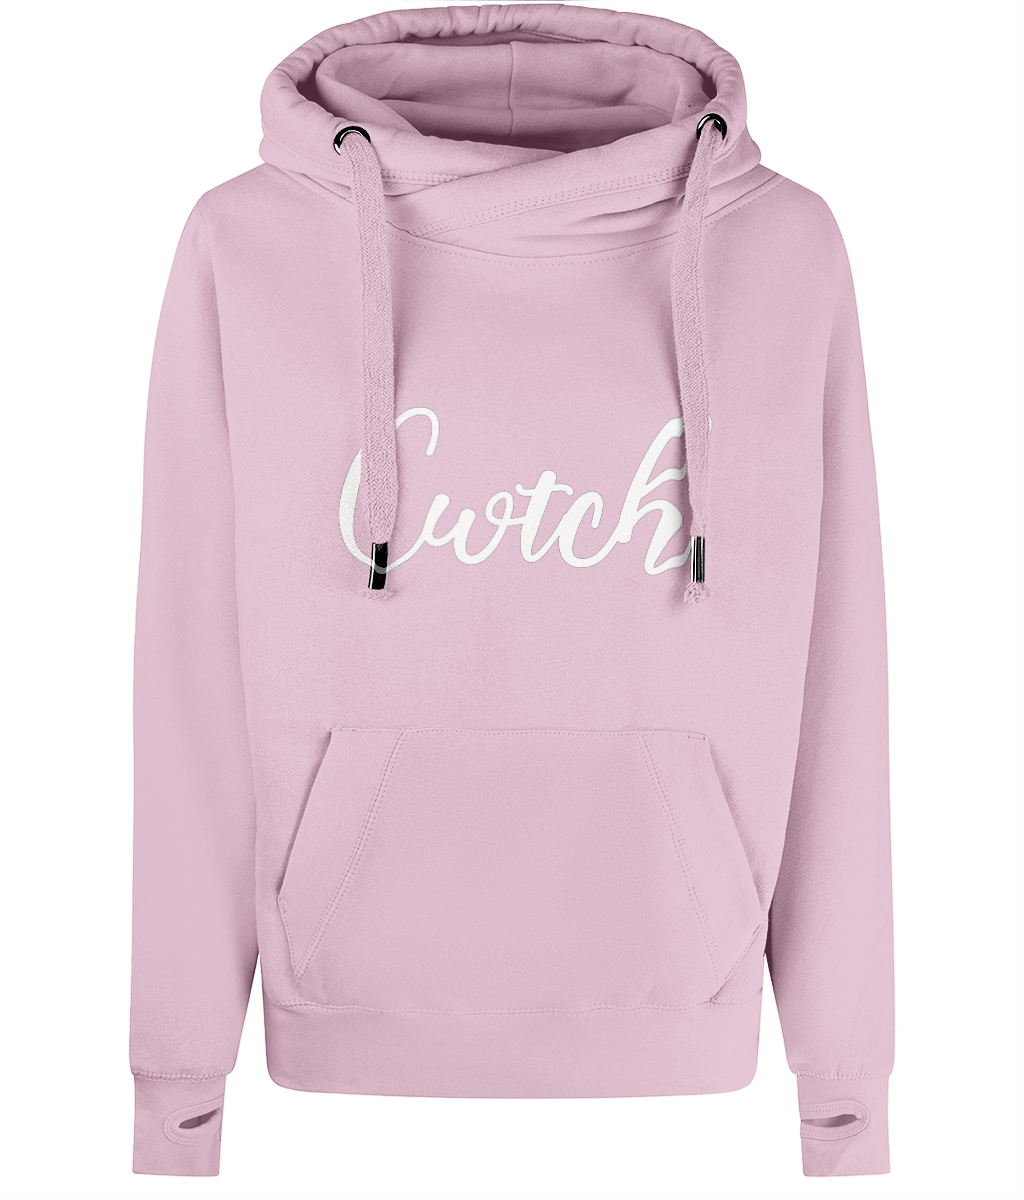 Cwtch Welsh Crossneck Premium Hoodie | Welsh Adult Clothing